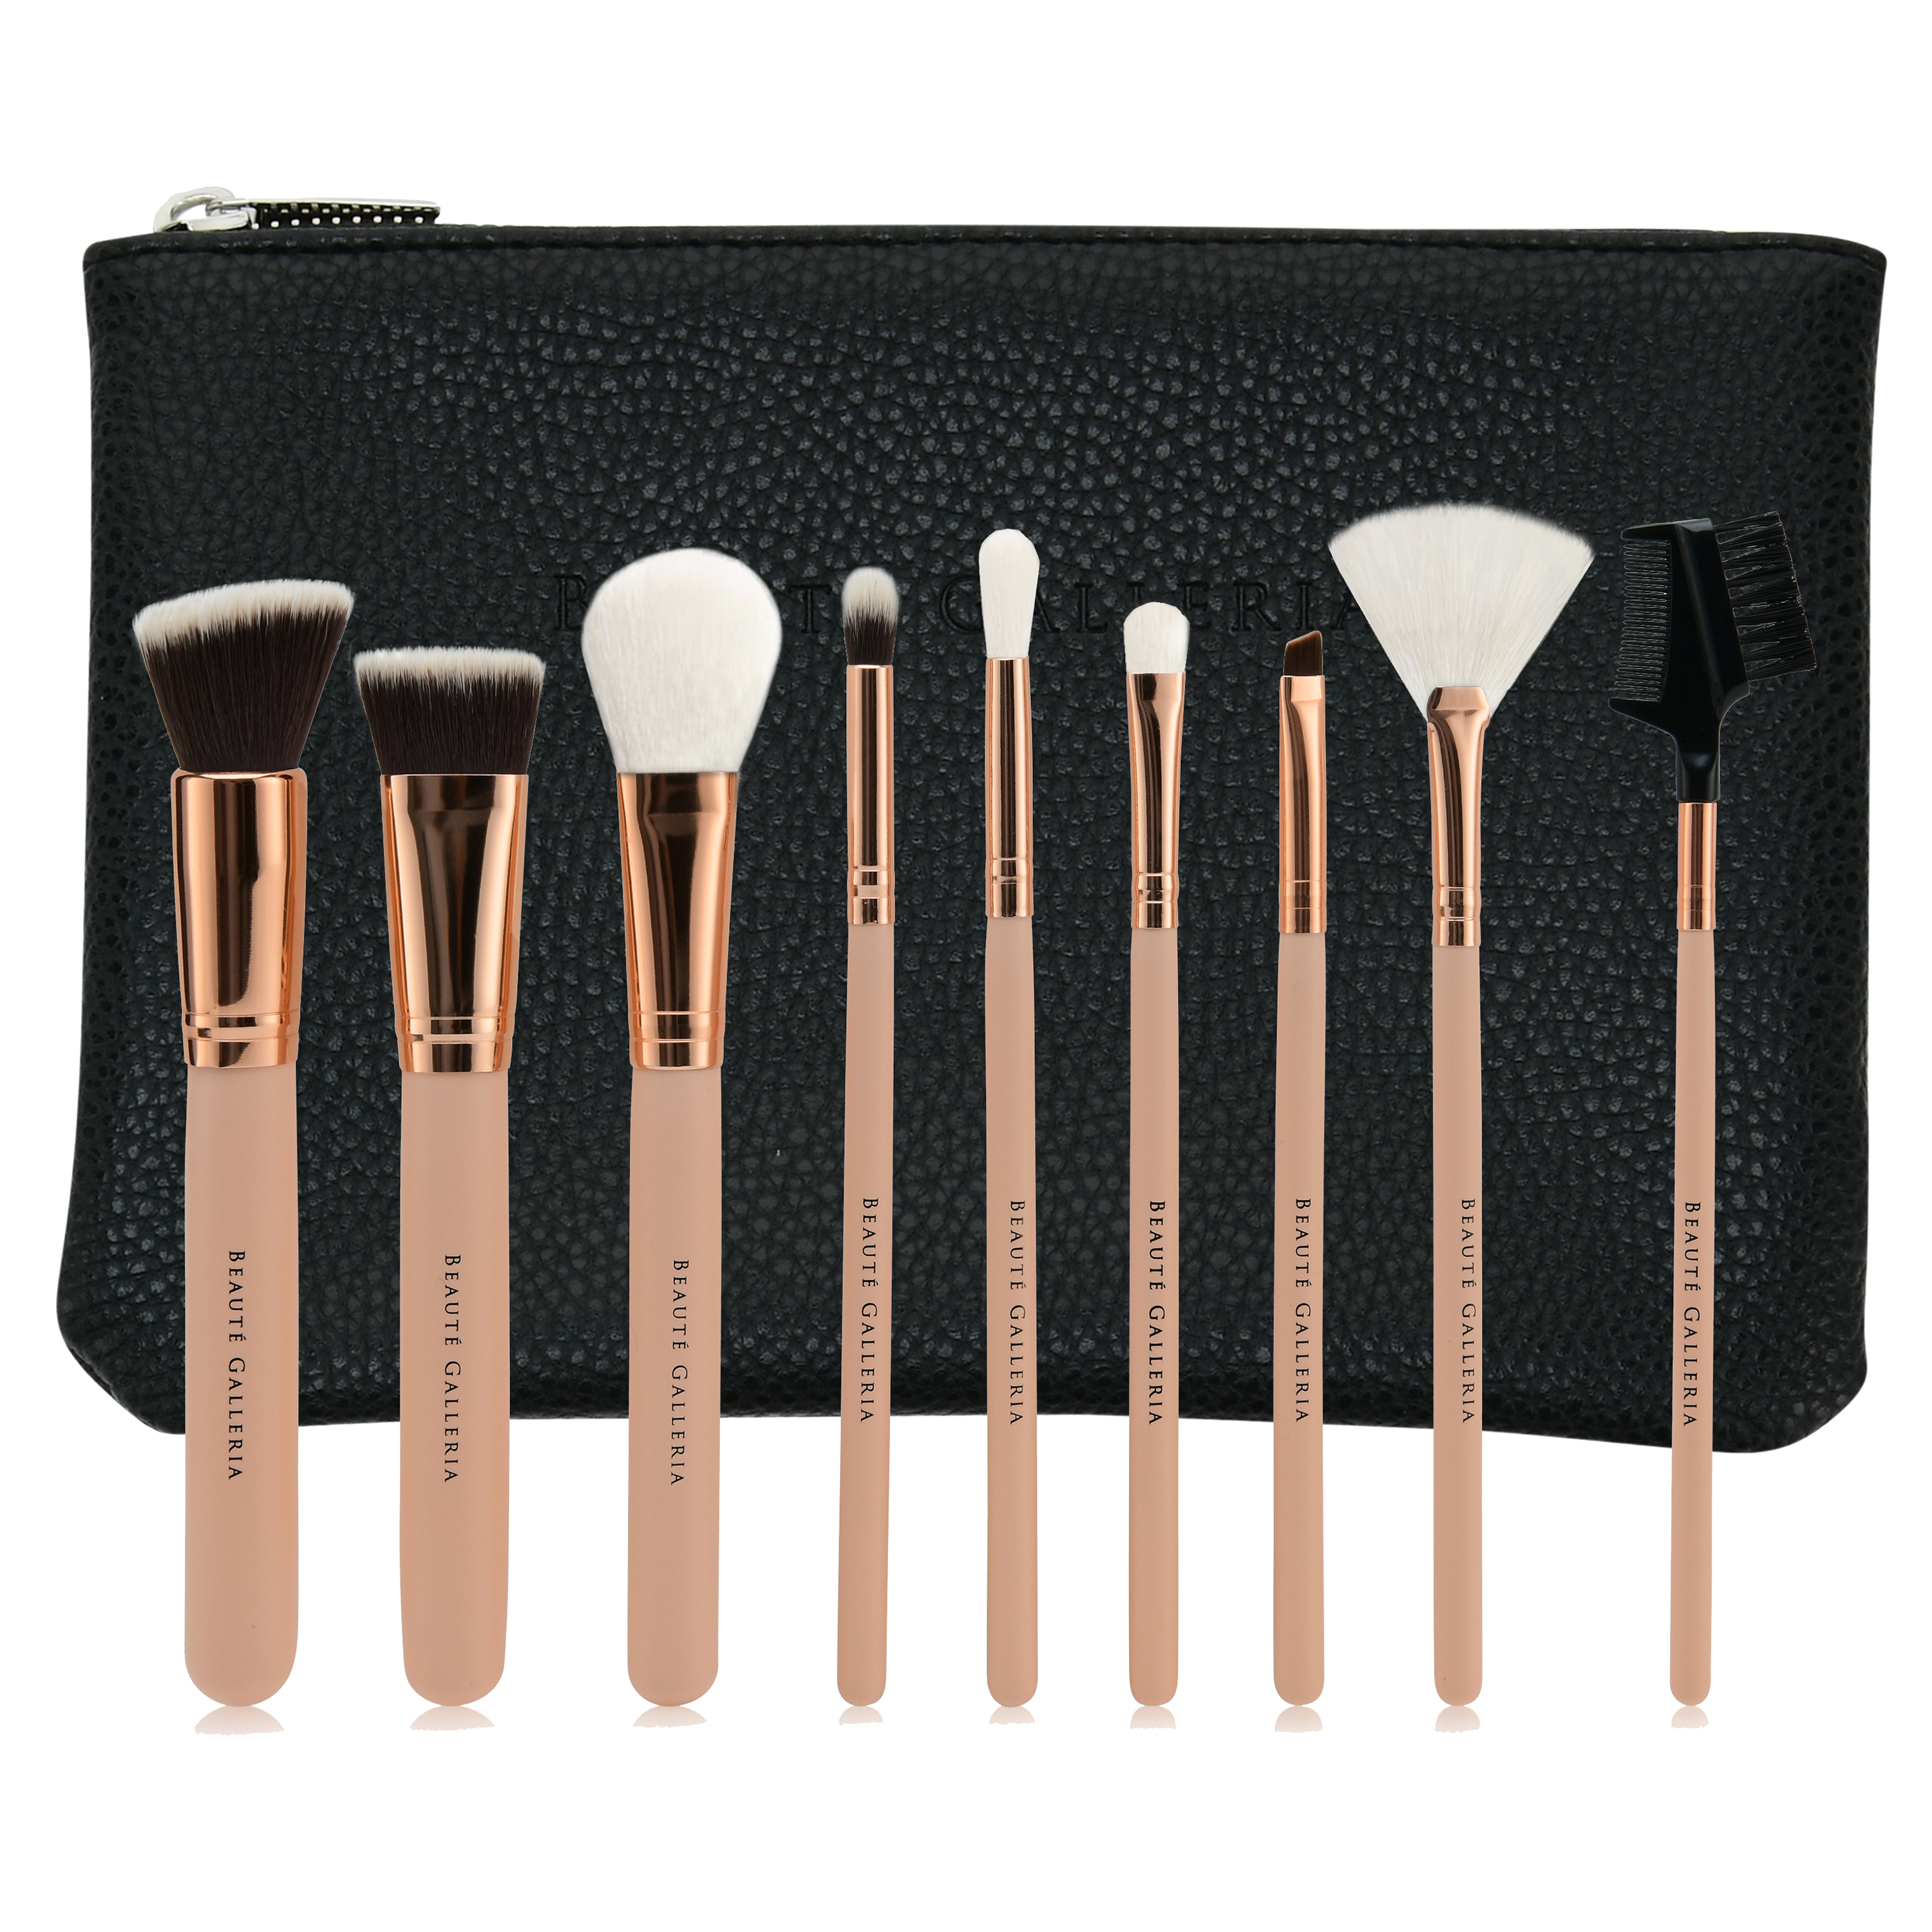 Beaute Galleria Makeup Brush Set, Vegan Cruelty-Free Synthetic Bristles with Travel Pouch Bag, 9 Pieces - image 1 of 8